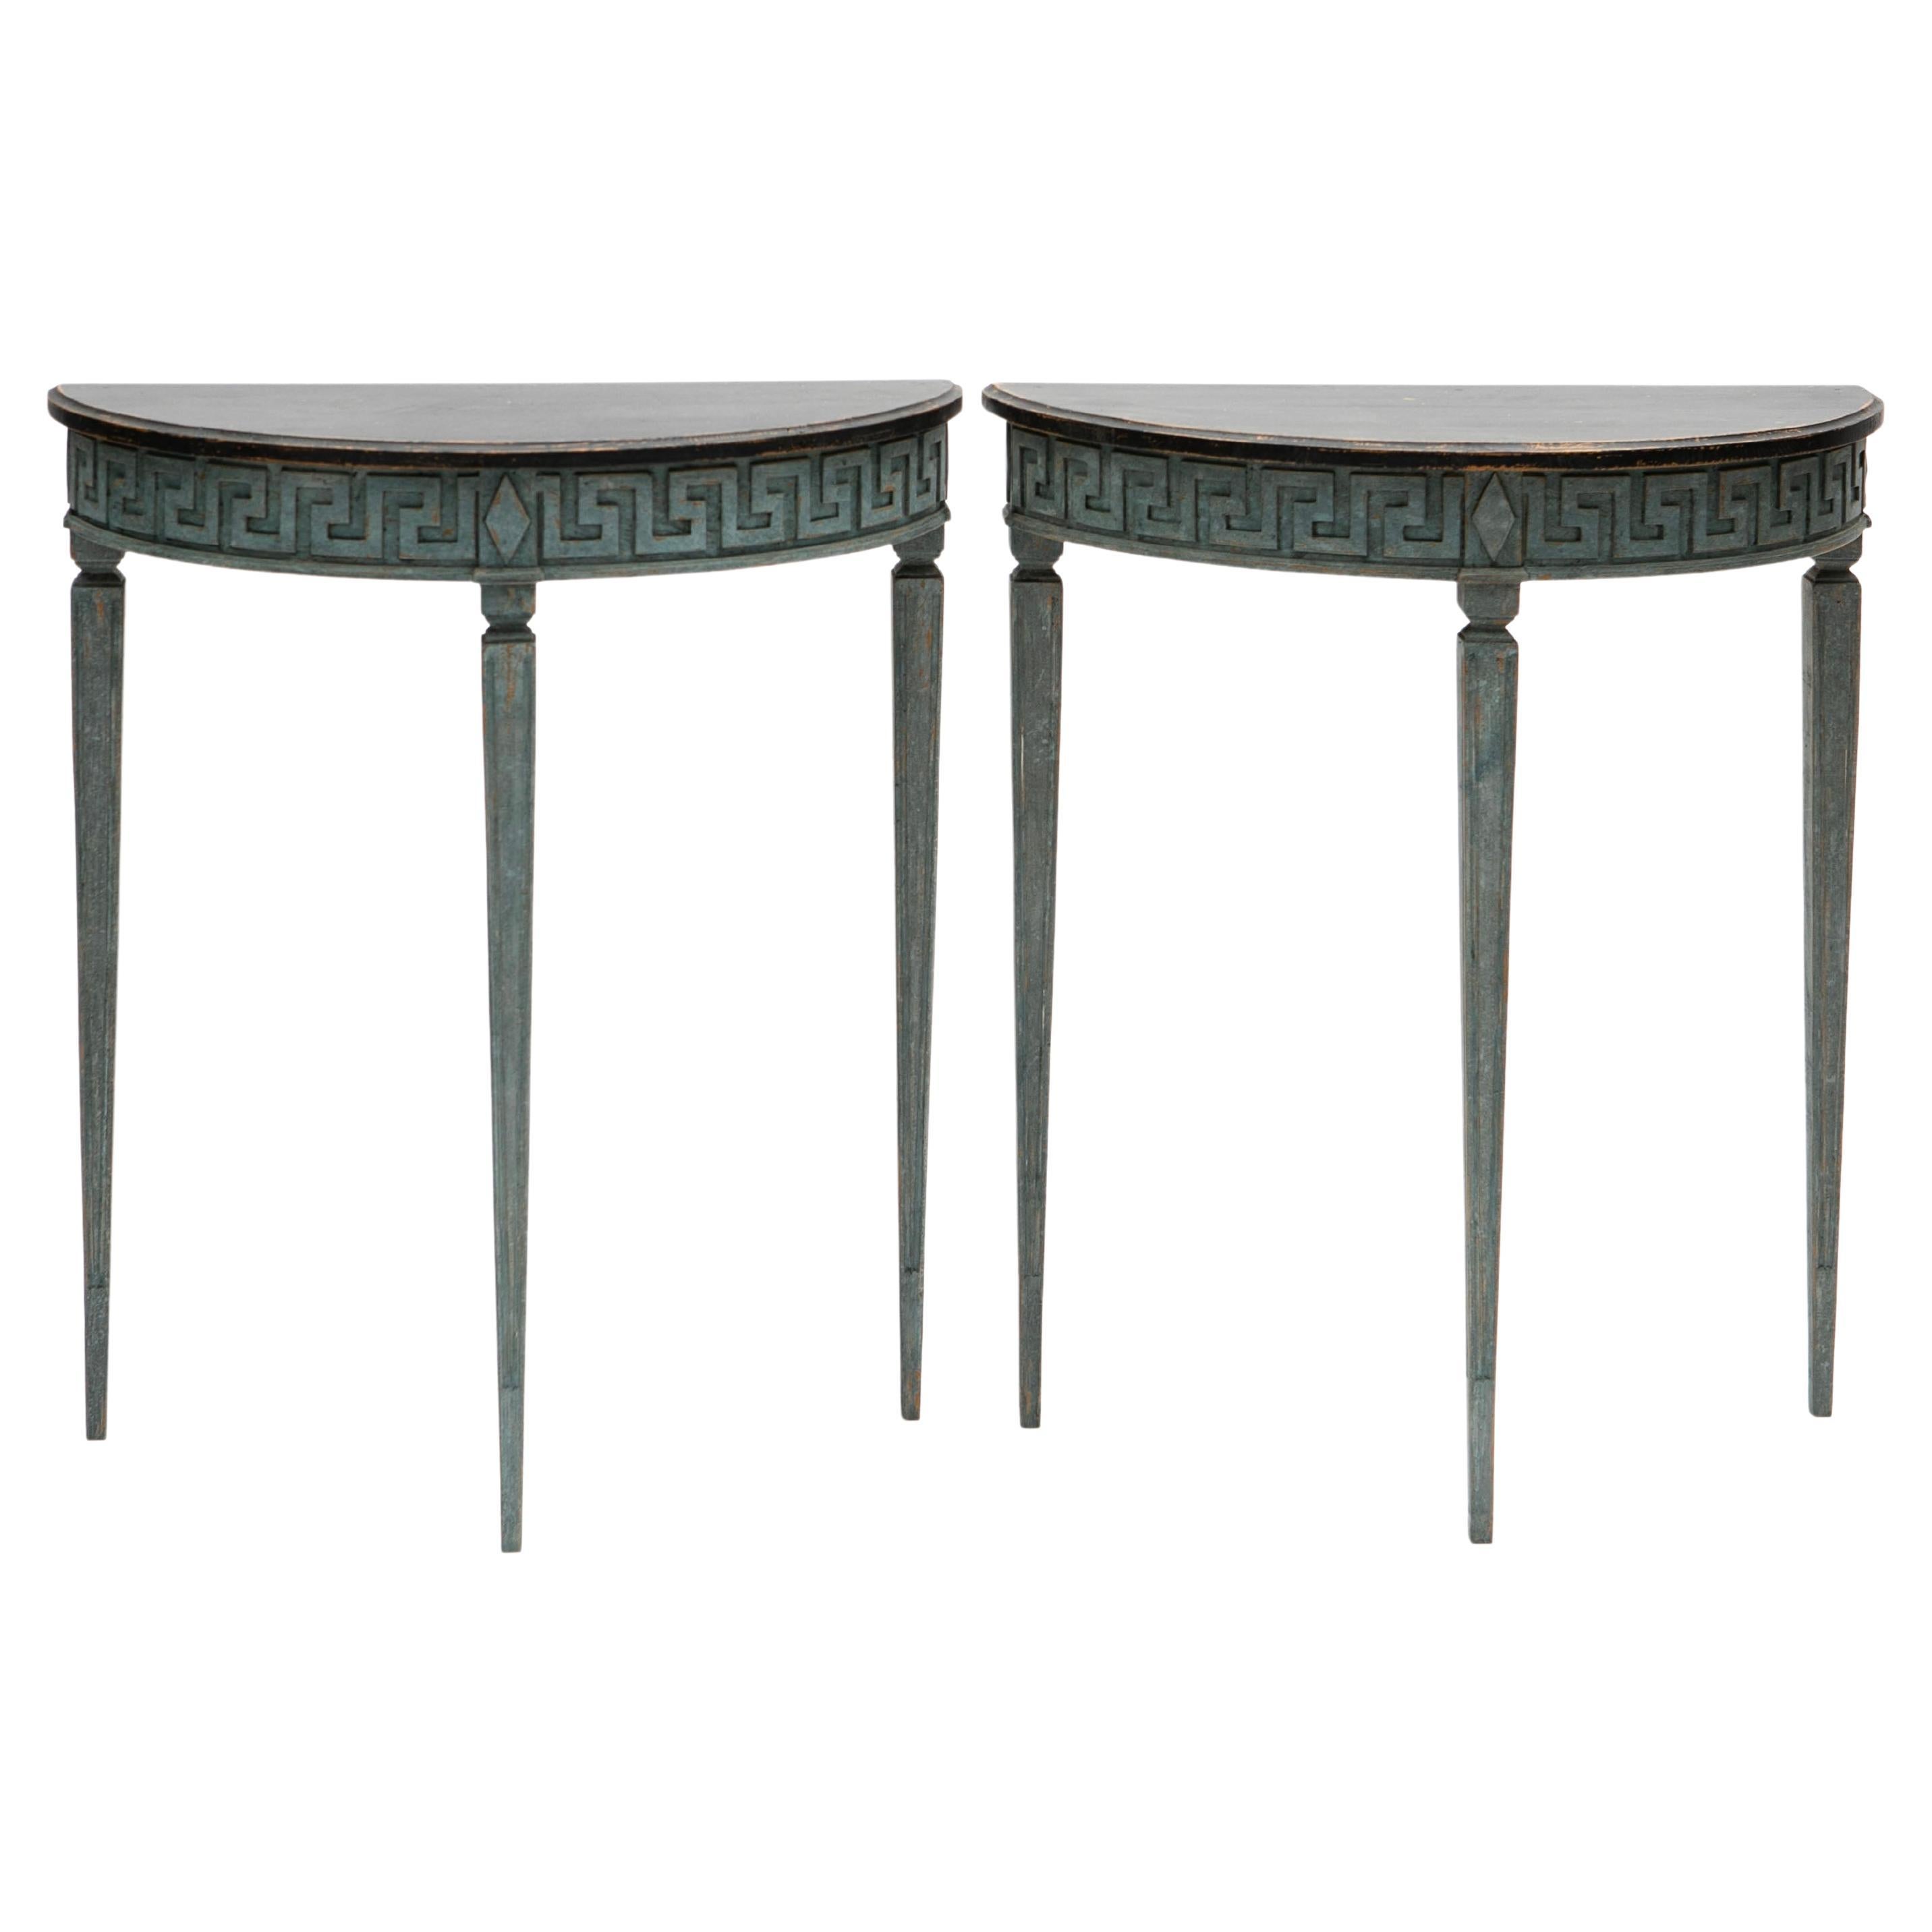 Pair of Gustavian-Style Demilune Console Tables, Sweden c. 1900